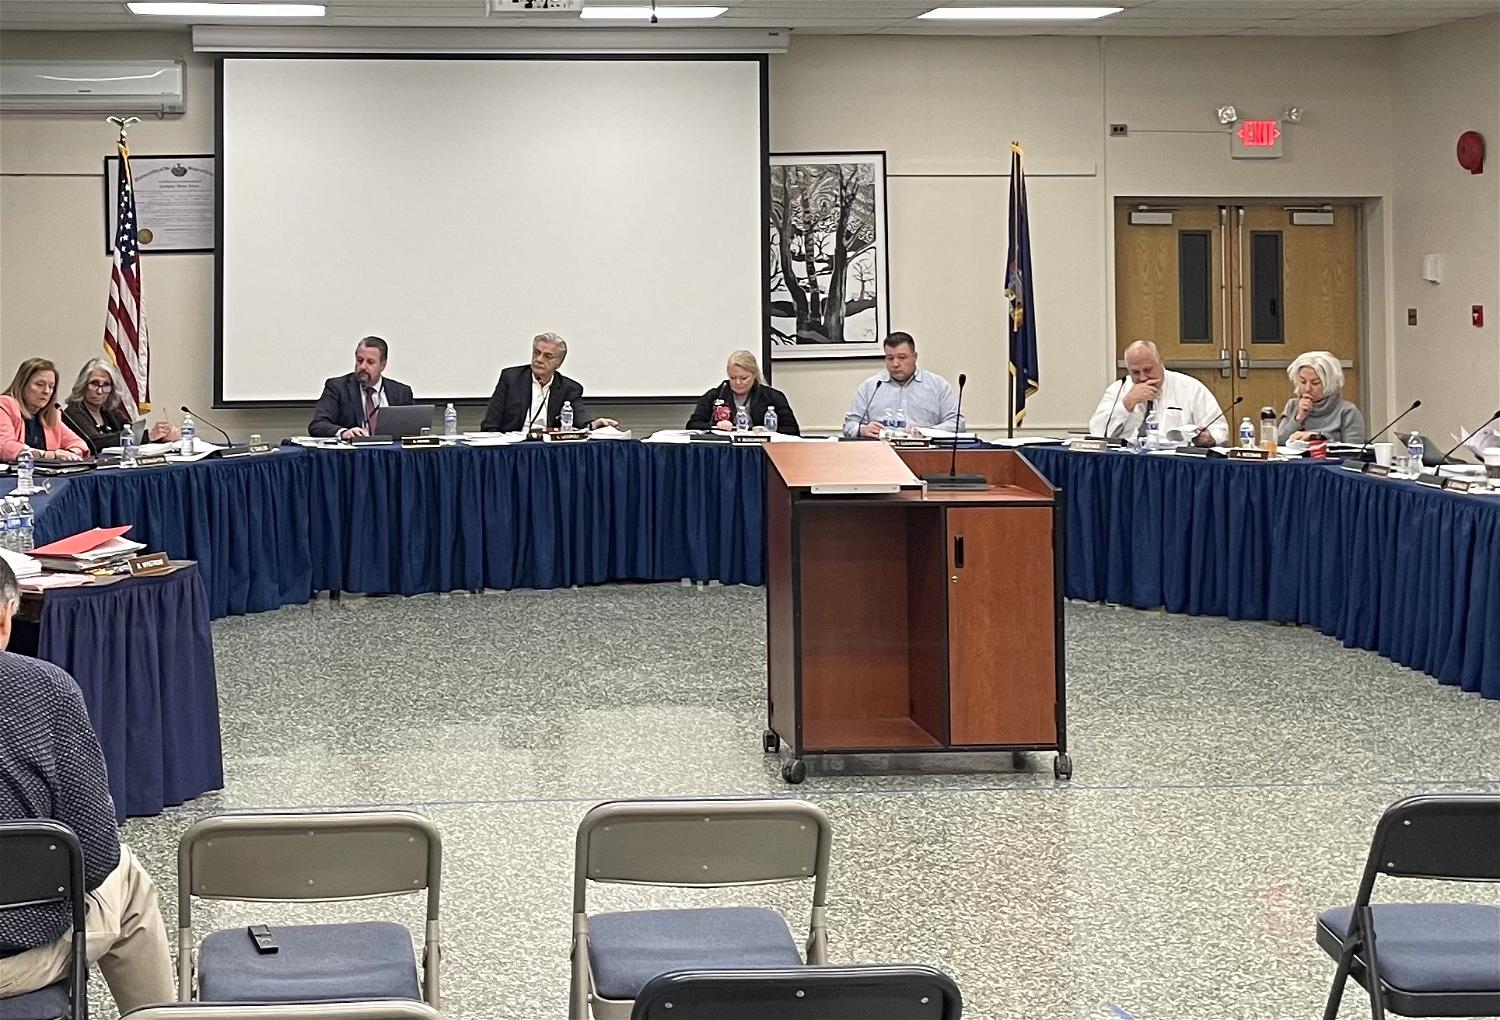 Budget season for the NEN school district has begun, with last week’s BOE meeting focused on the non-instructional district budget. 